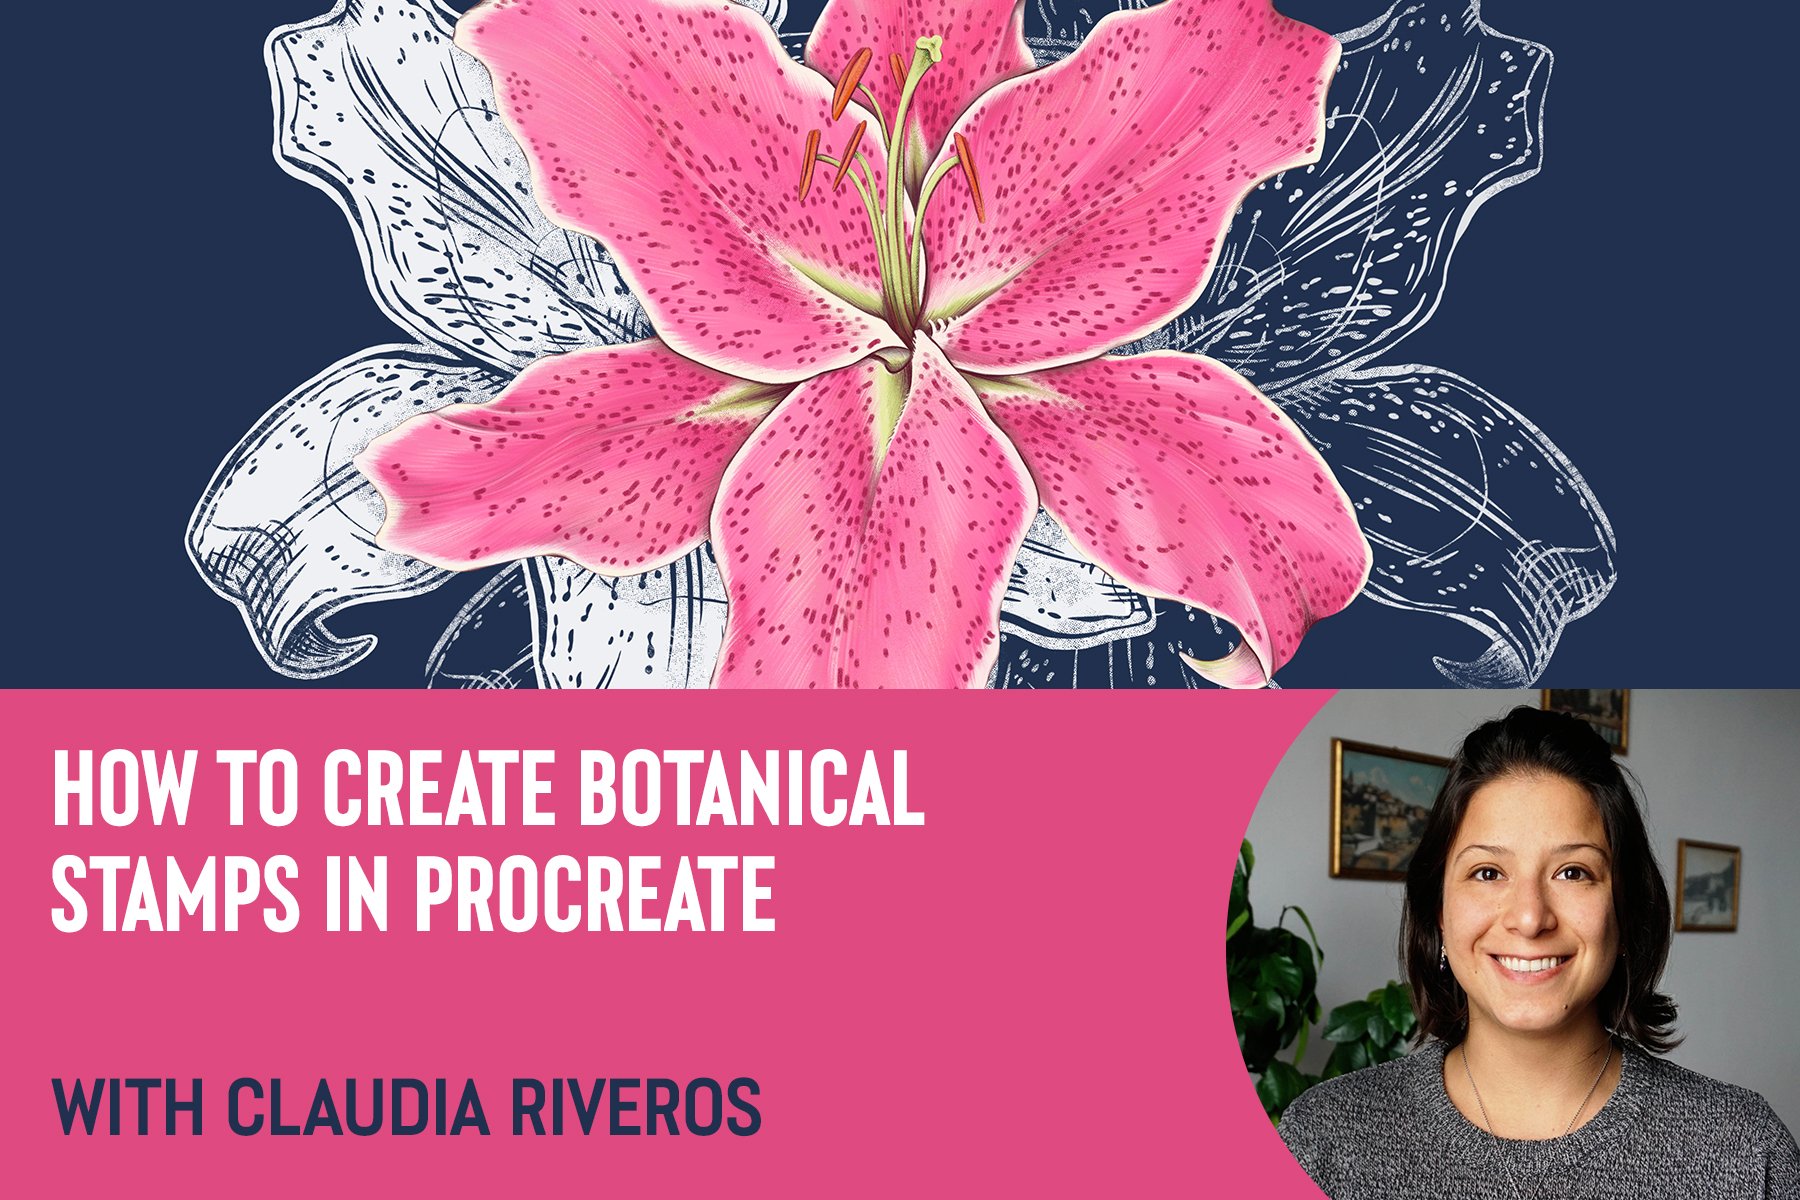 How to Create Botanical Stamps with Claudia Riveros